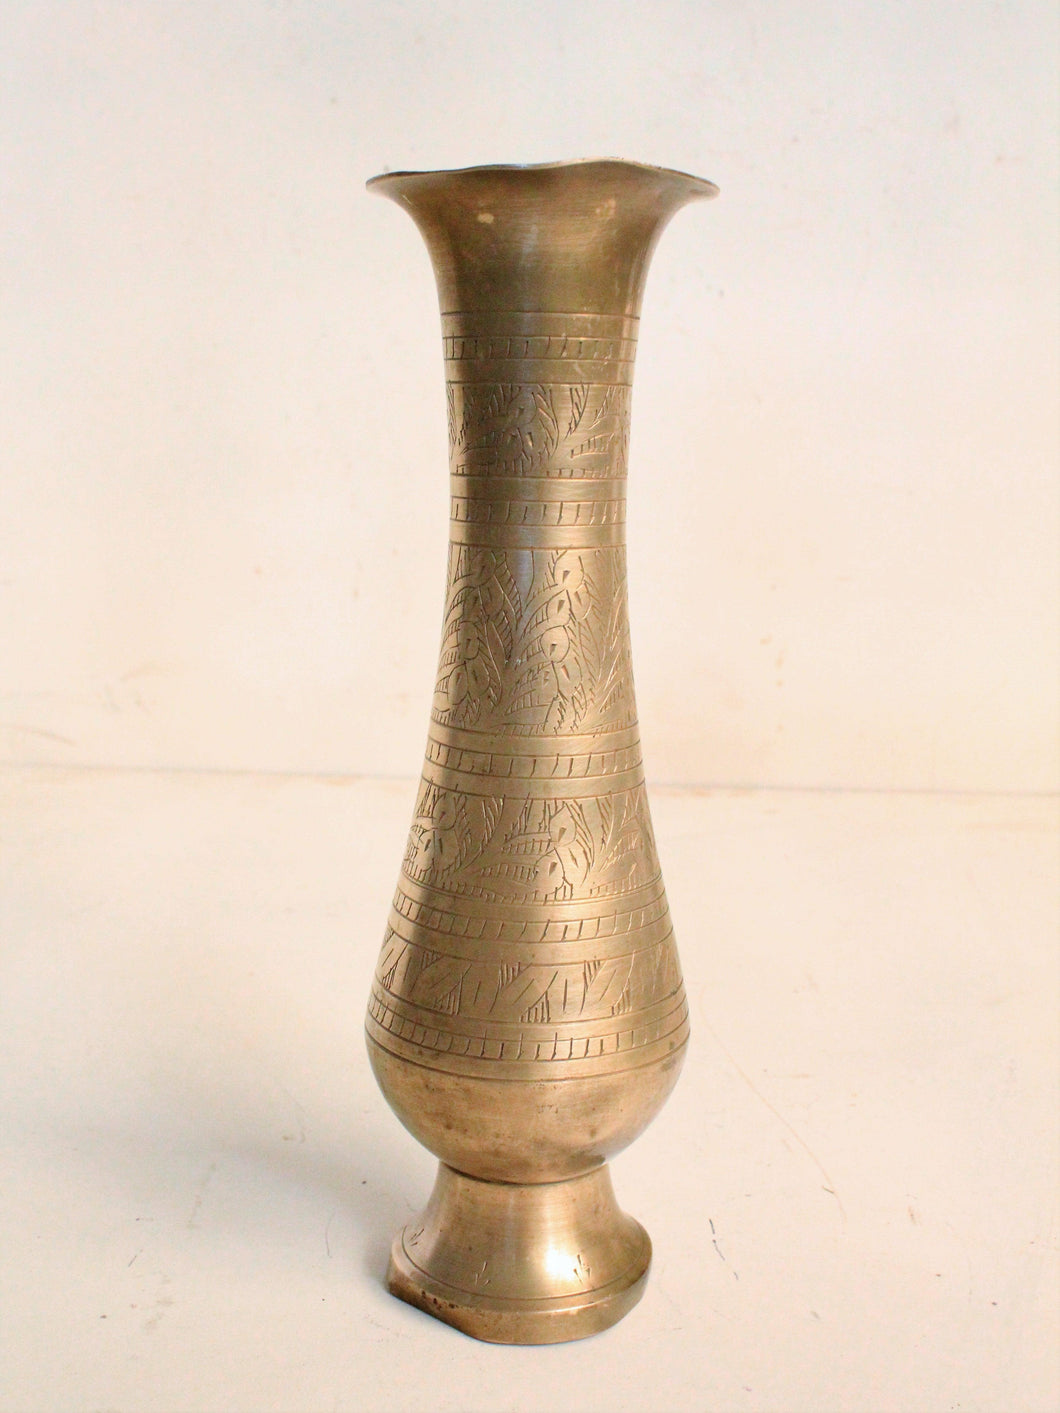 Beautiful Vintage Brass Hand Carved Vase - Style It by Hanika